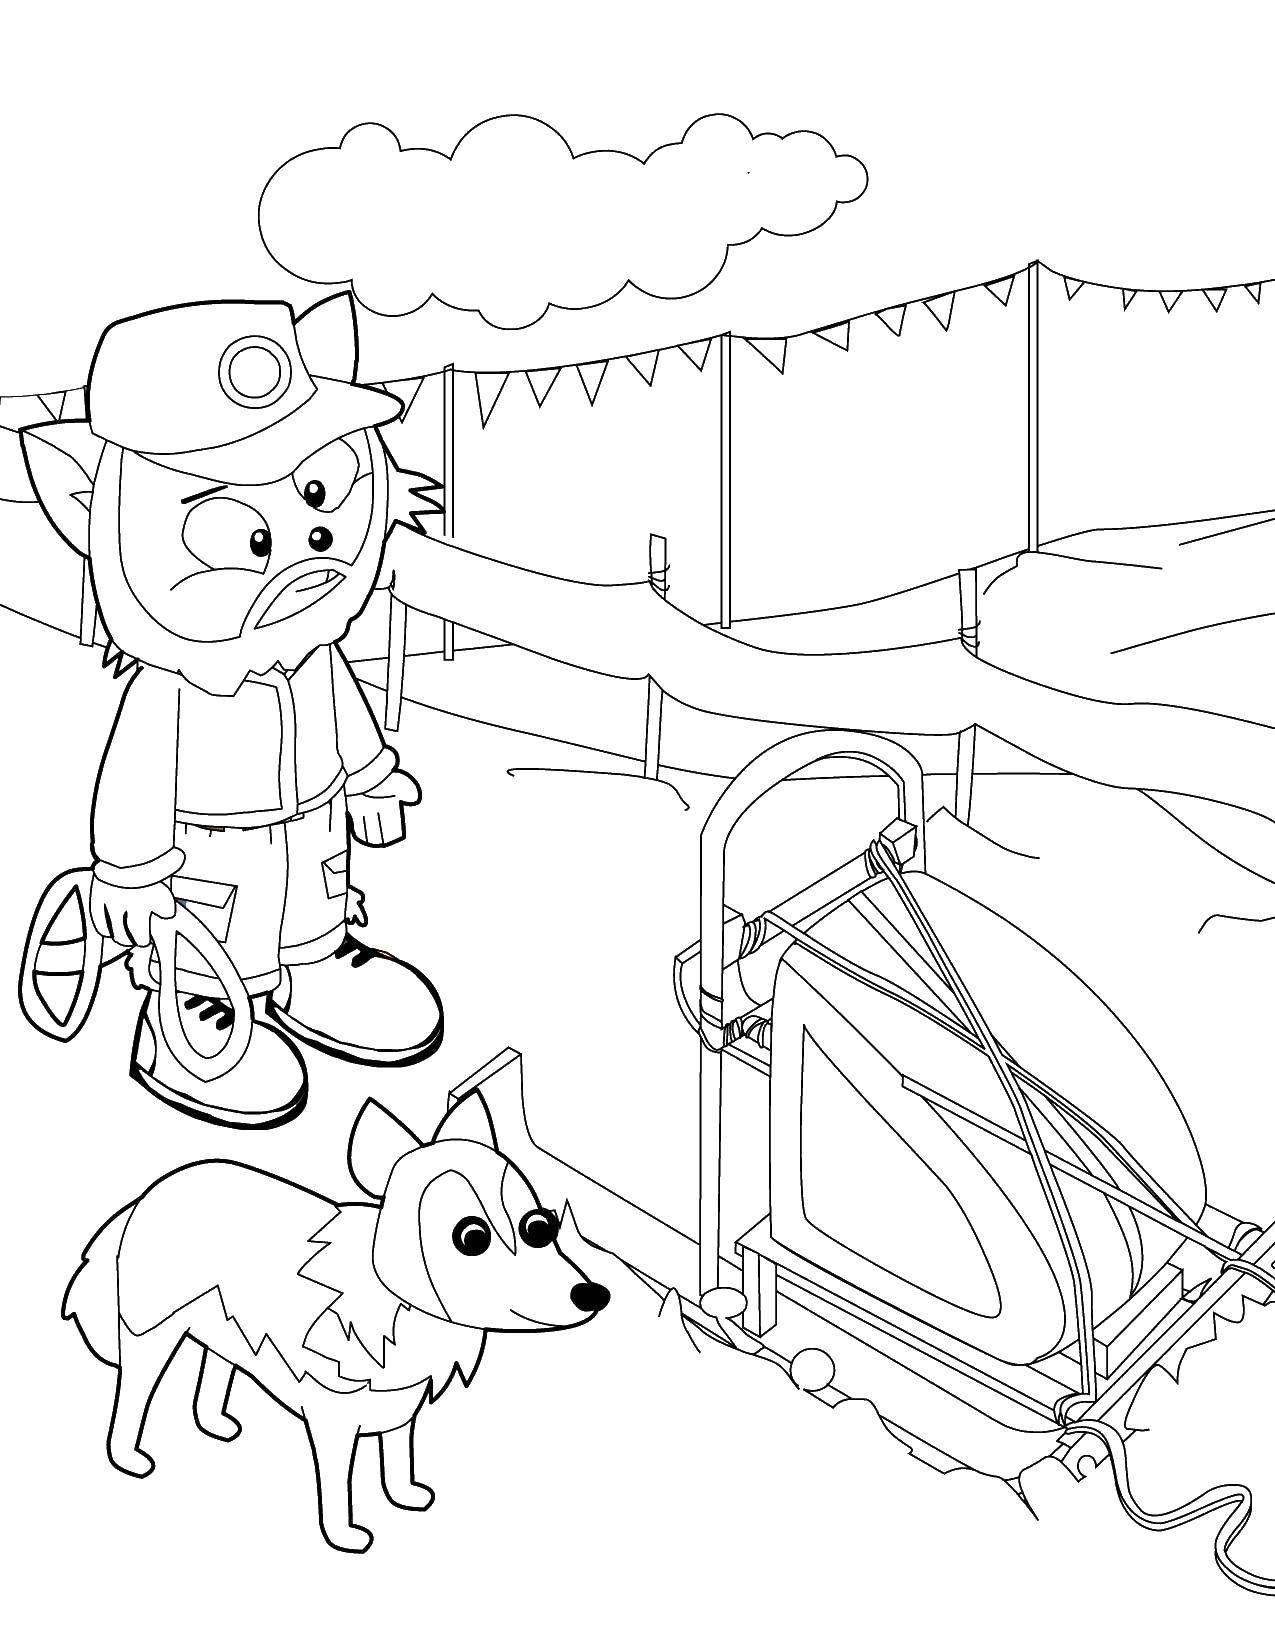 Coloring Sleigh. Category coloring. Tags:  snow, winter, sleigh.